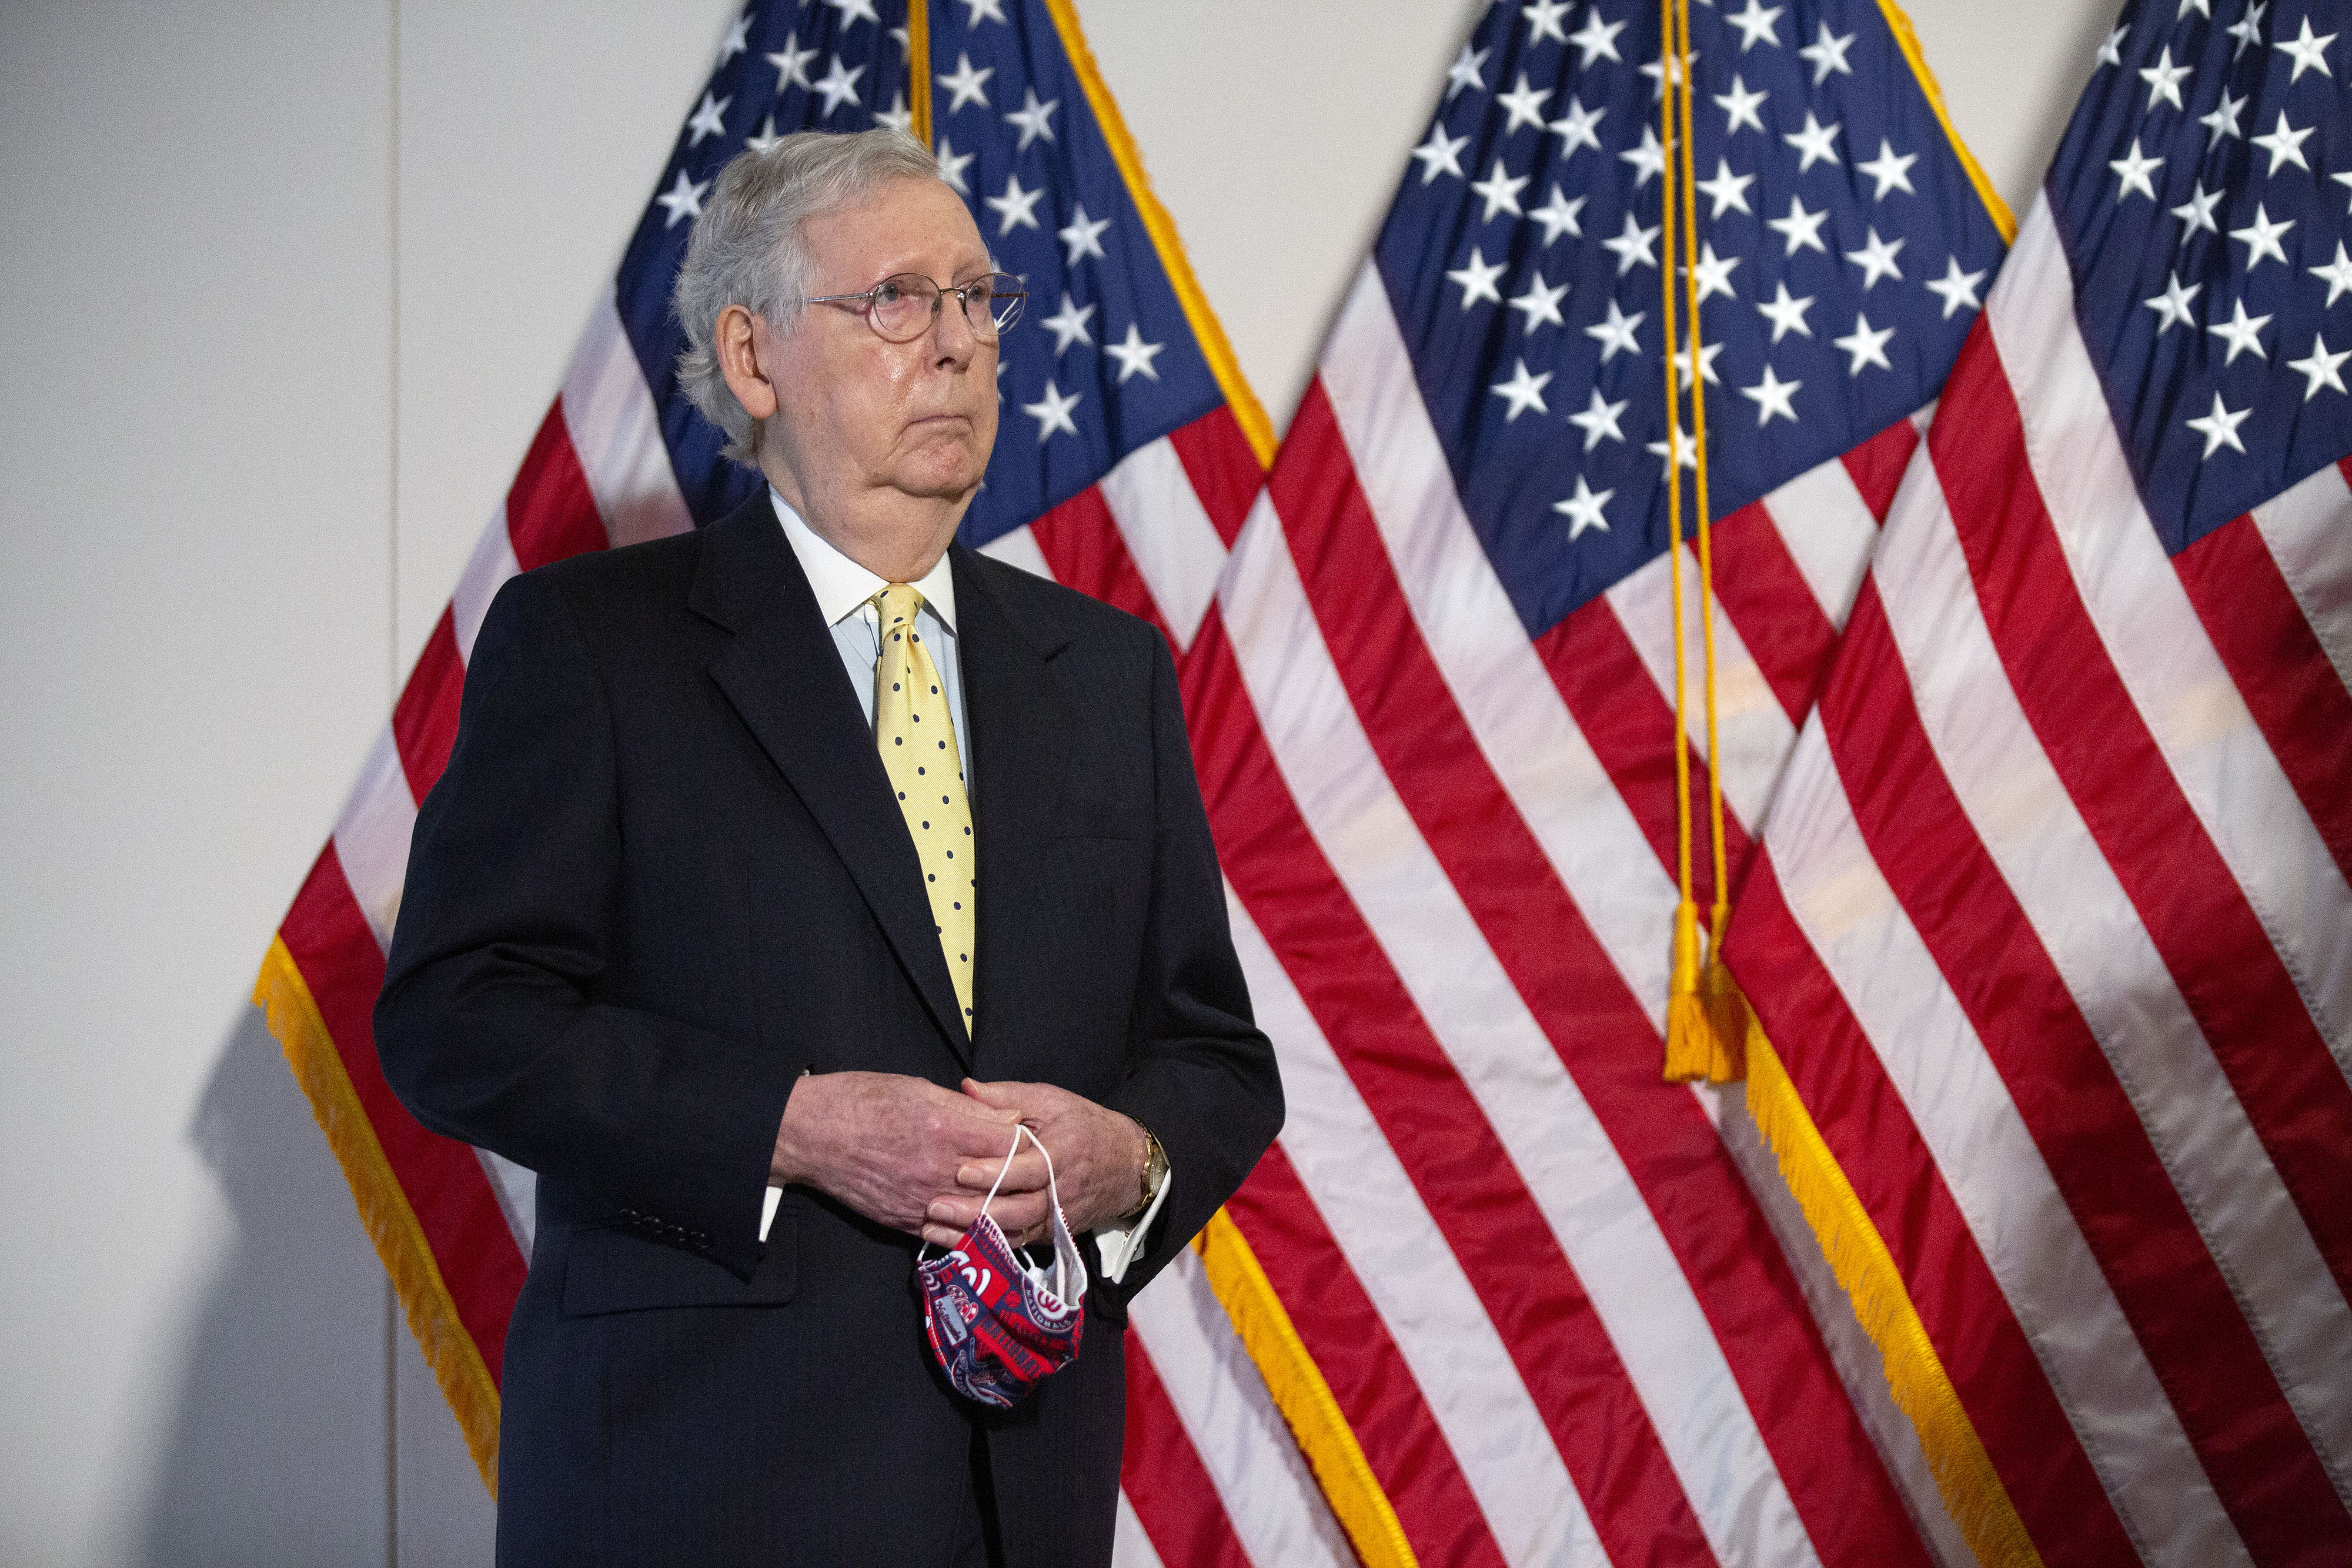 Senate Majority Leader Mitch McConnell listens during a news conference in Washington, DC, on July 21.